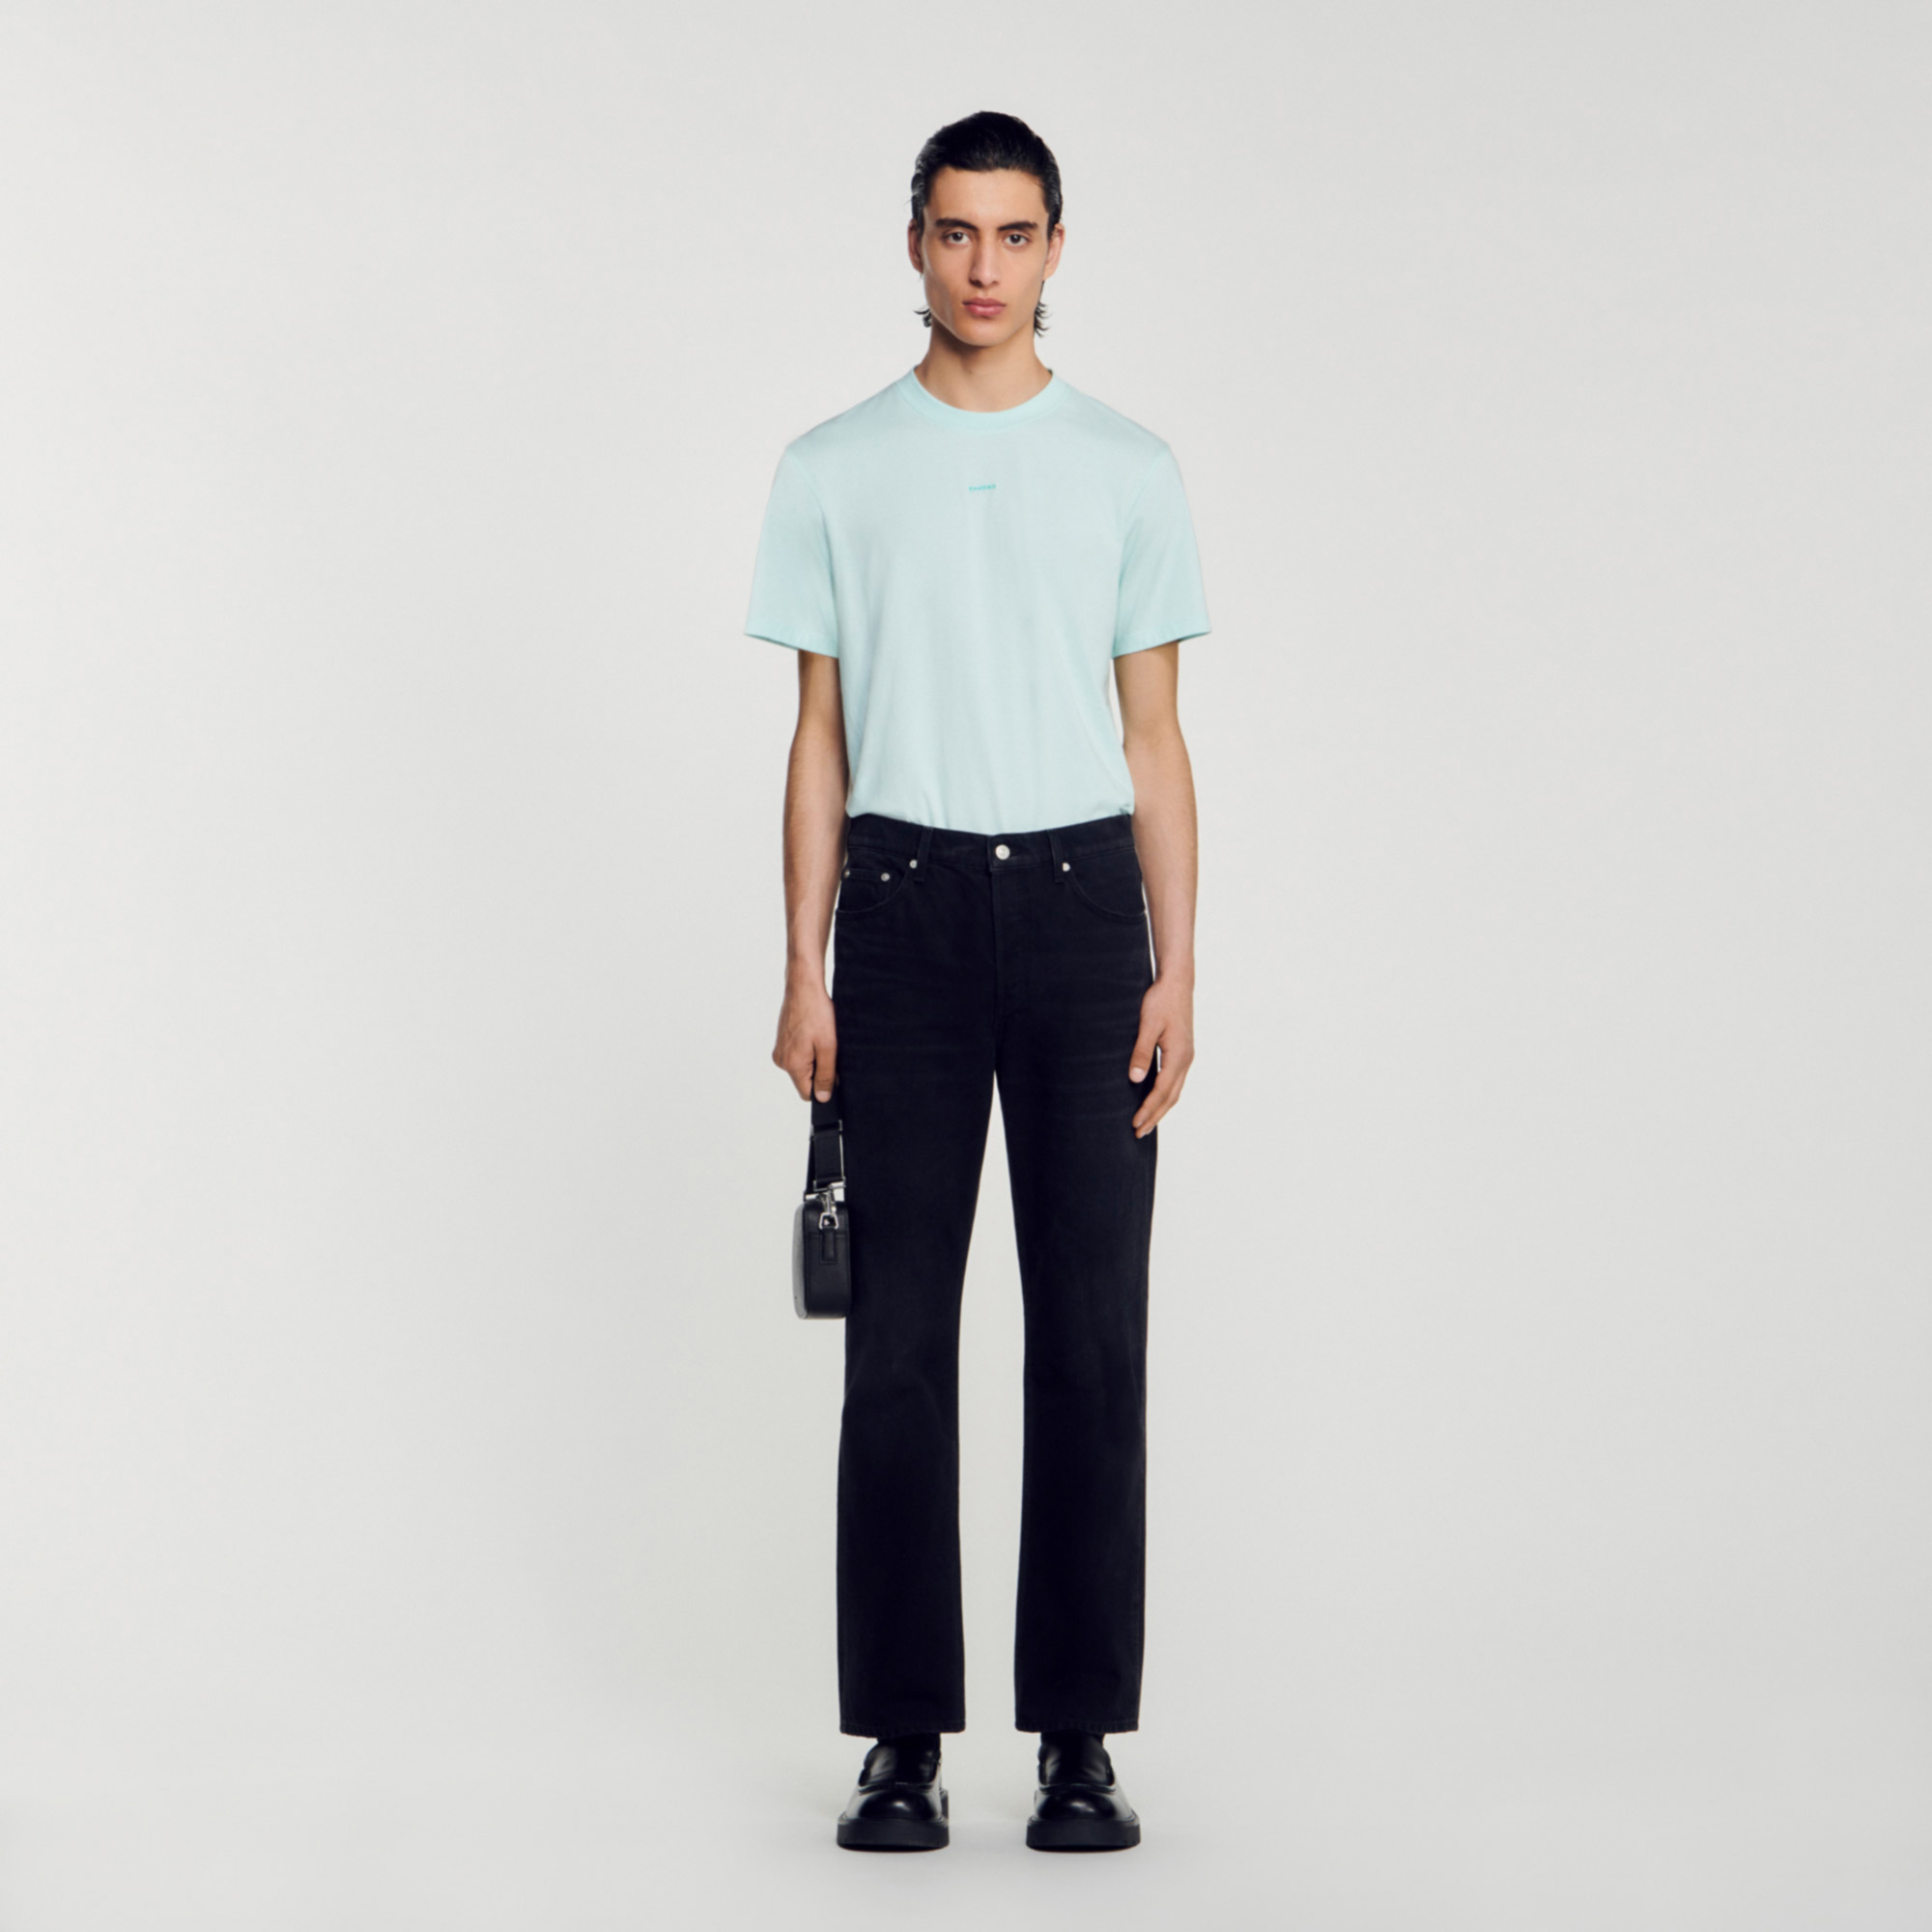 Sandro cotton Straight-leg denim jeans with five pockets and a leather jacron on the back